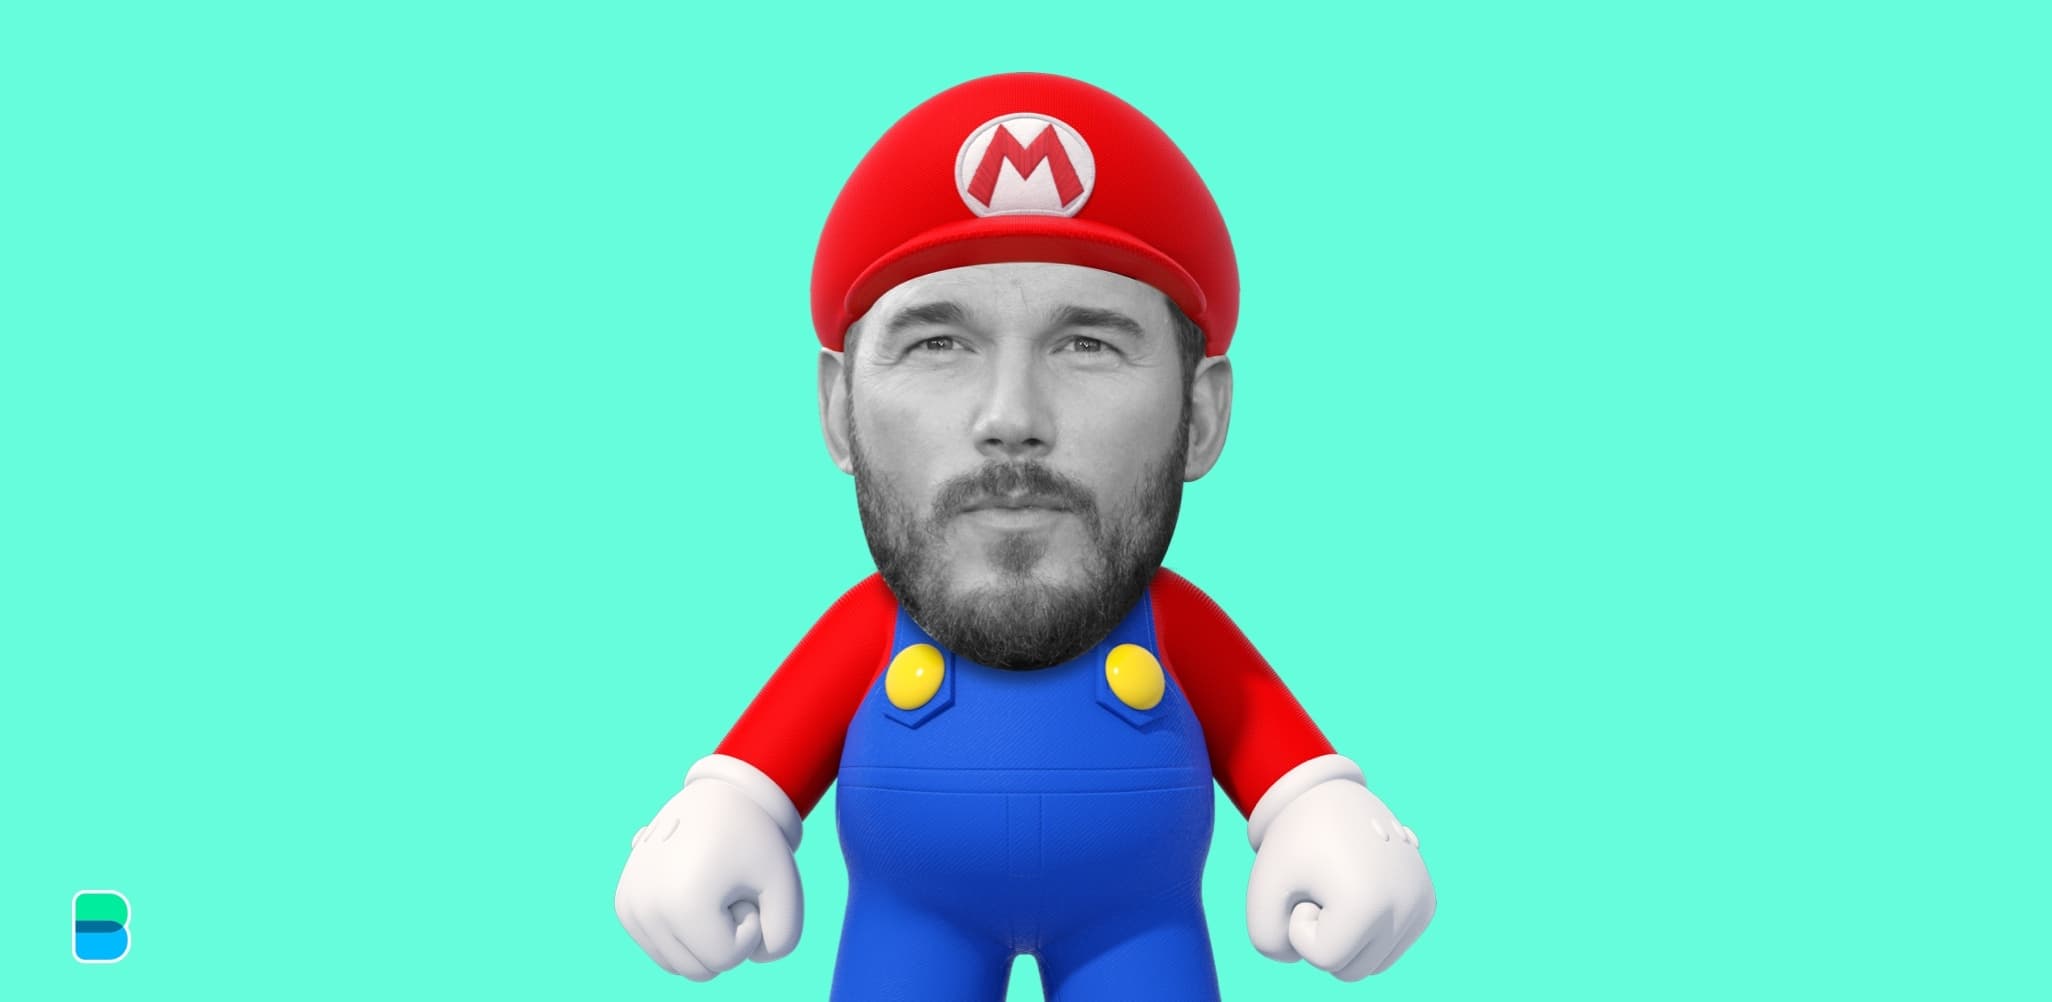 We can&rsquo;t wait to see Chris Pratt as Mario!